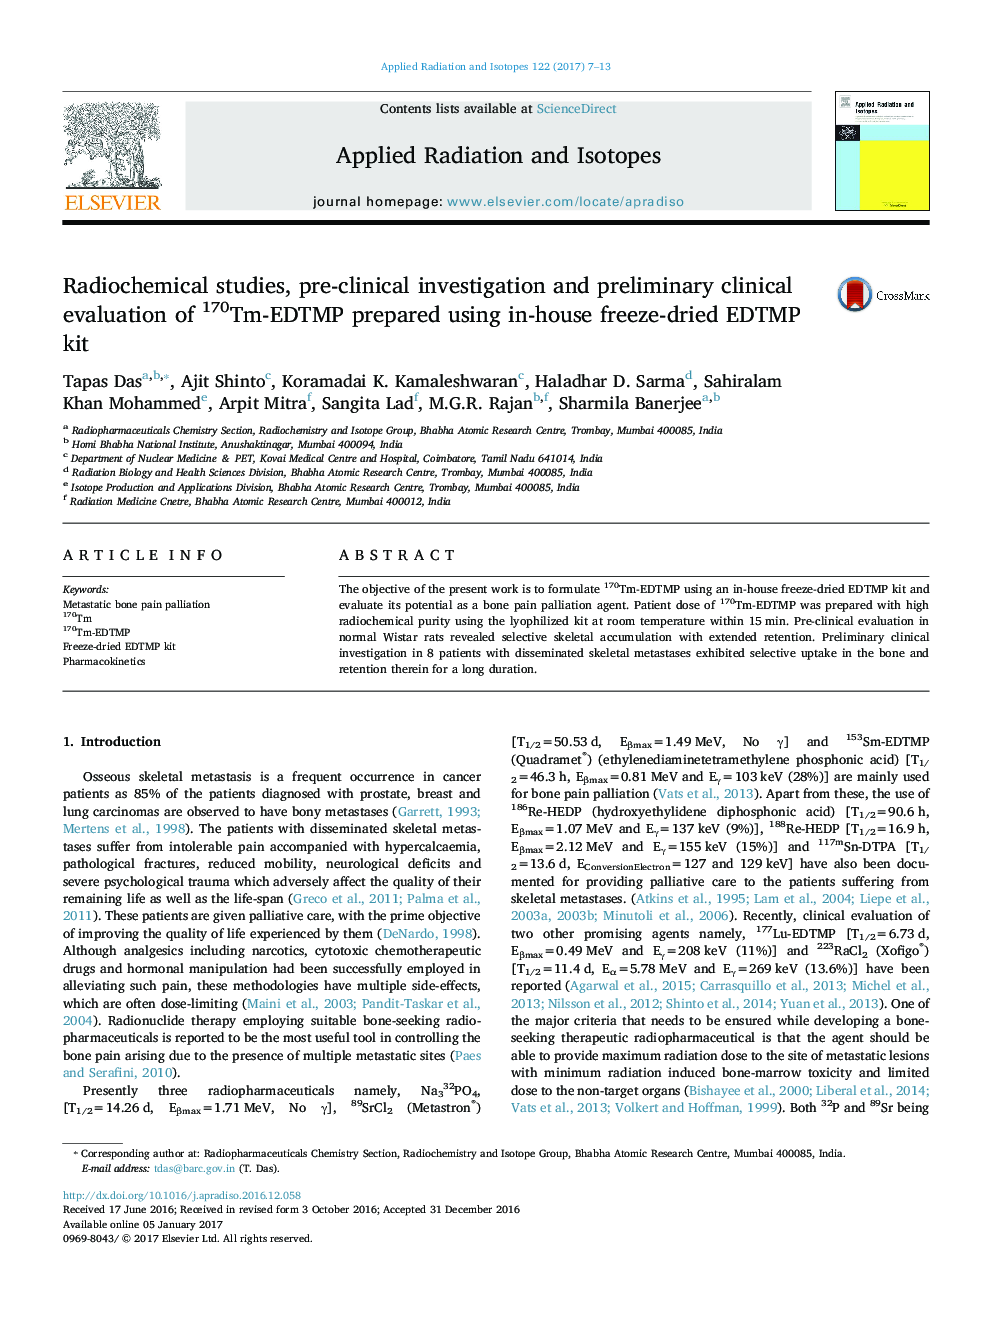 Radiochemical studies, pre-clinical investigation and preliminary clinical evaluation of 170Tm-EDTMP prepared using in-house freeze-dried EDTMP kit